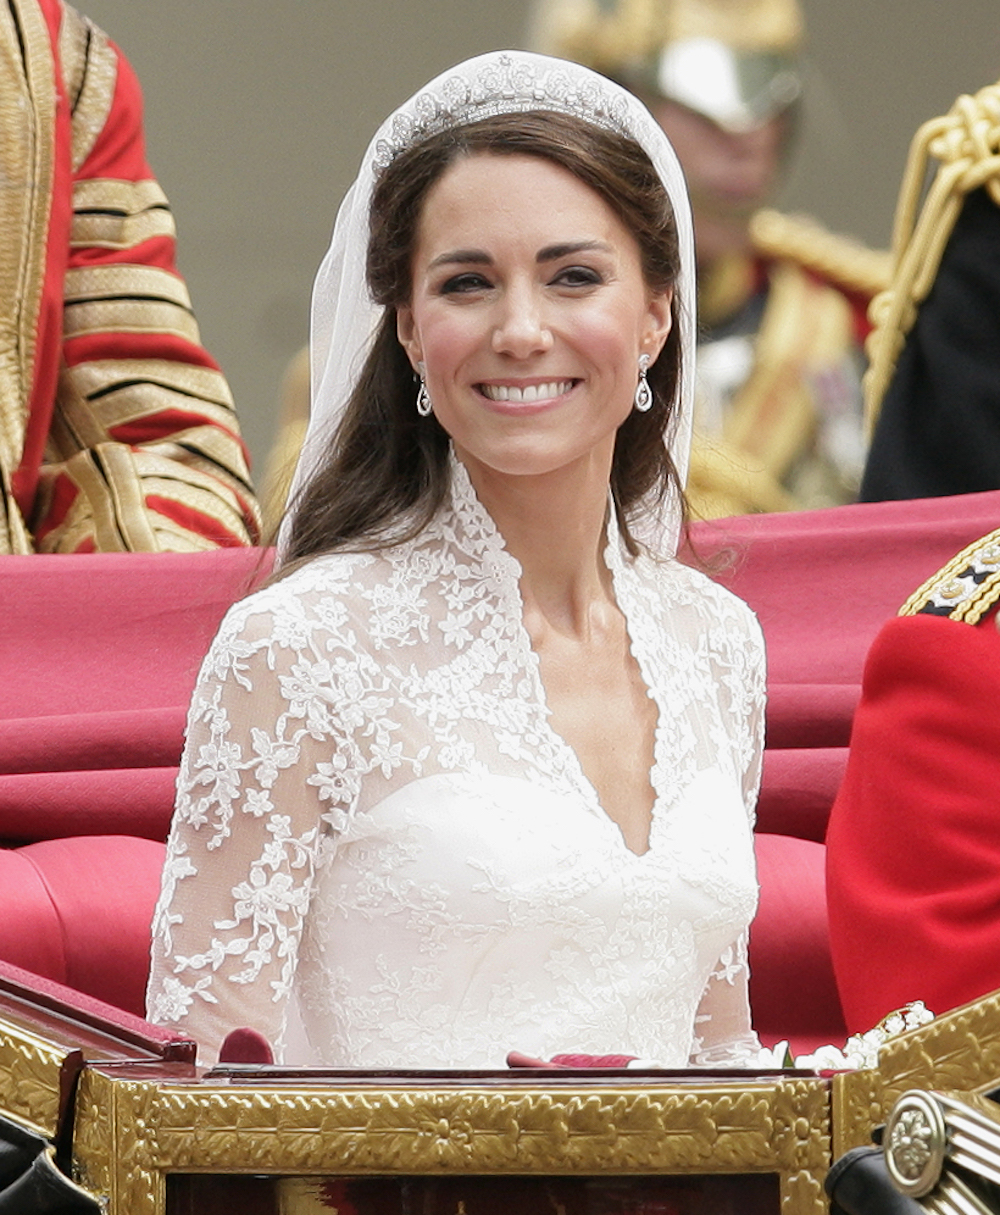 William and Kate 2011 wedding